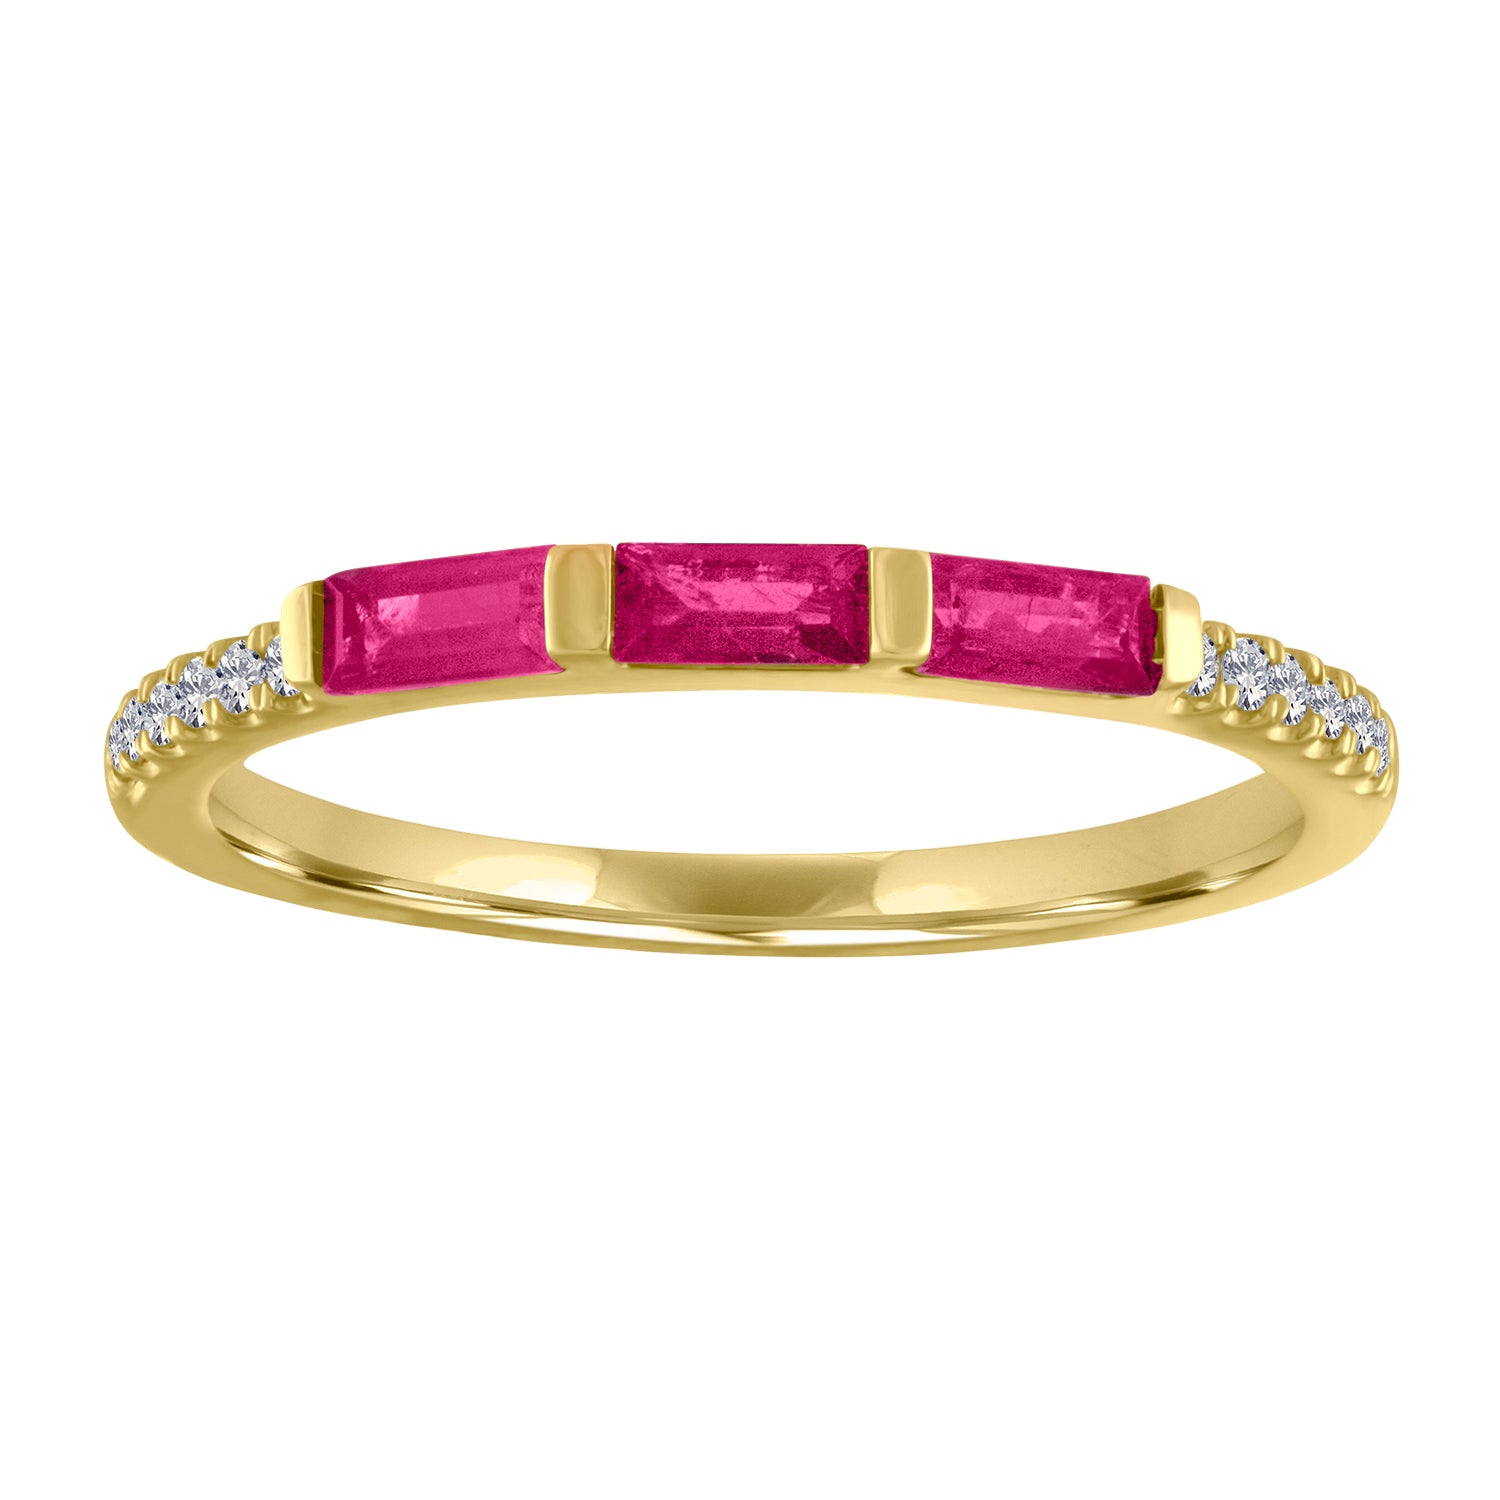 Yellow gold skinny band with three ruby baguettes and round diamonds on the shank.